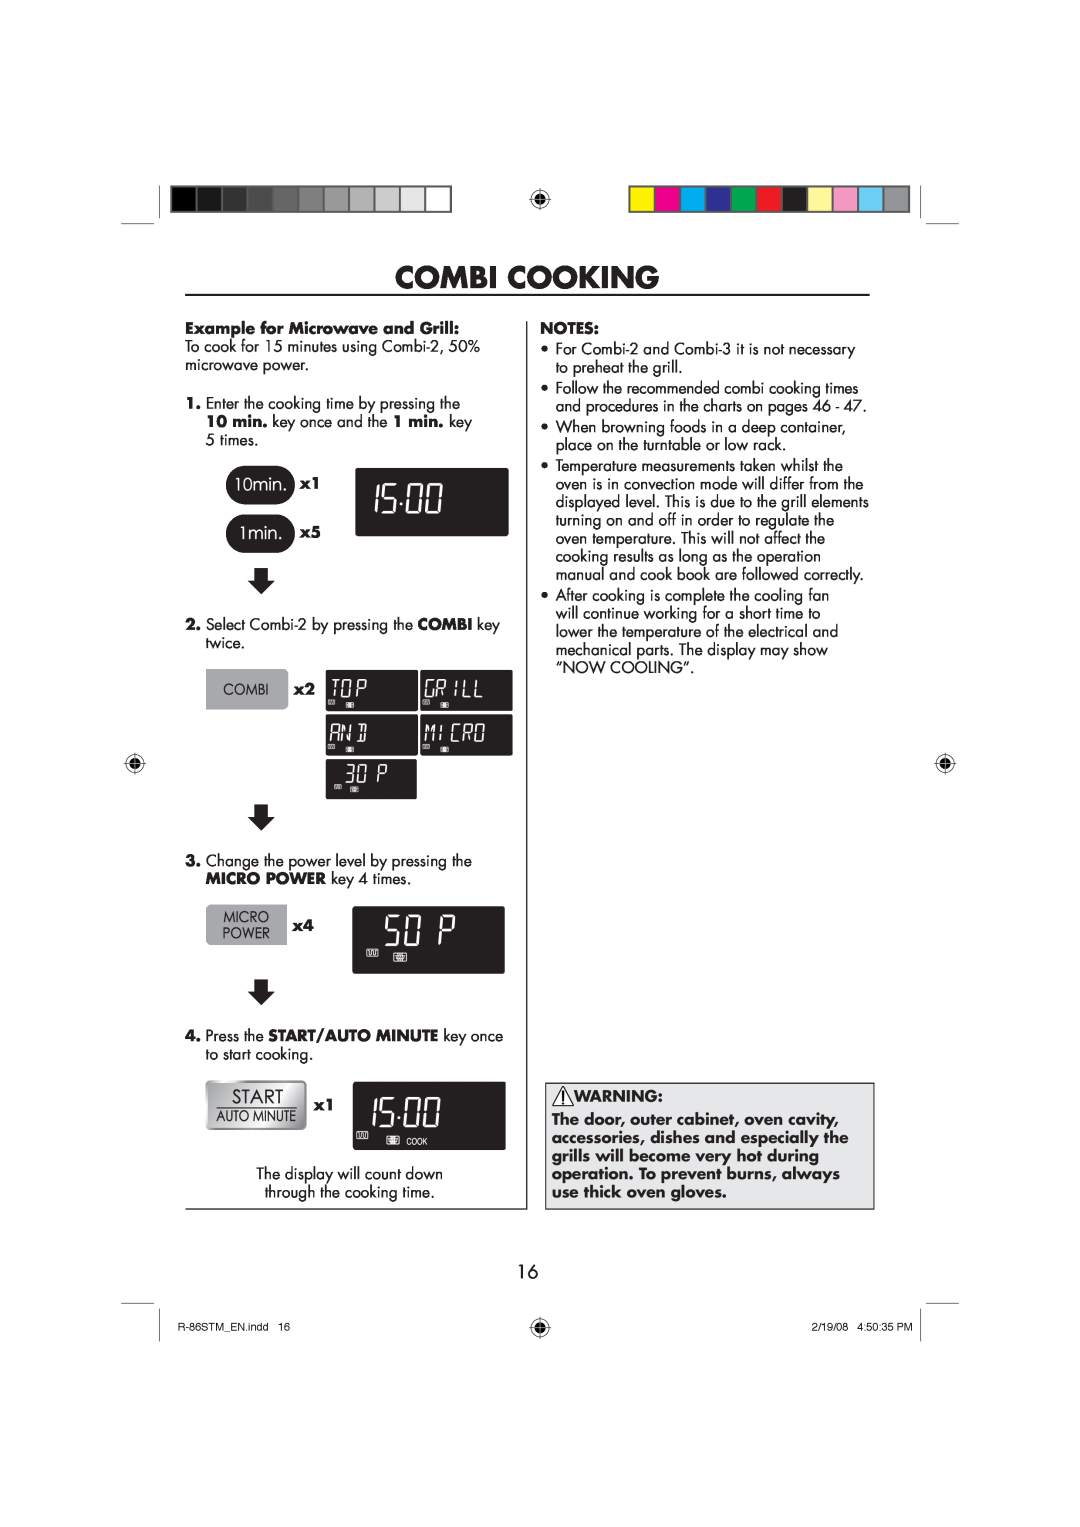 Sharp R-86STM manual Combi Cooking, x1 